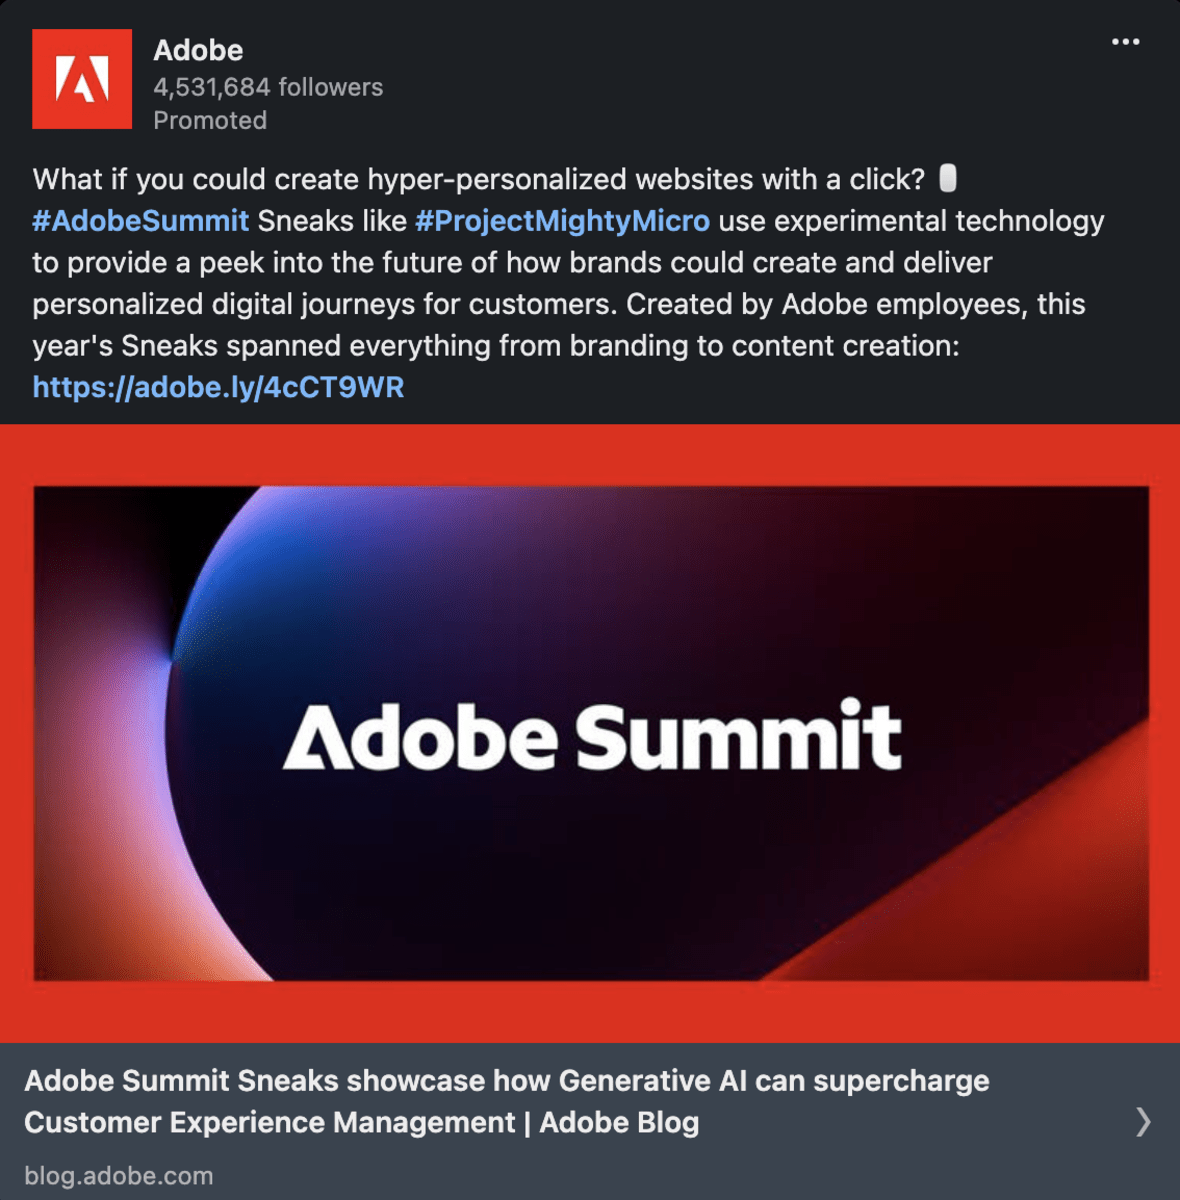 Adobe uses LinkedIn-s Sponsored Content to reach its audience